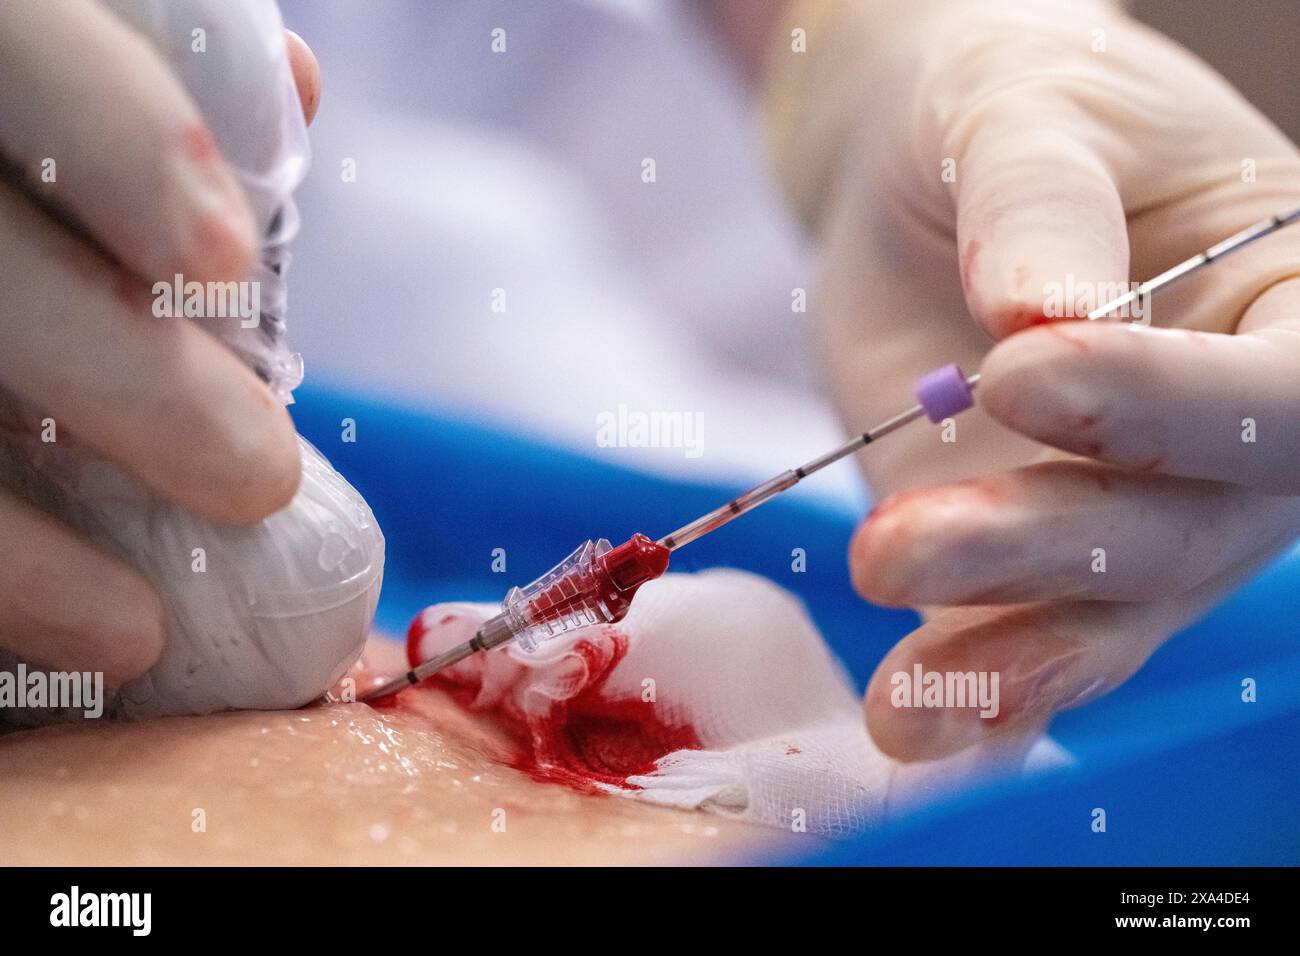 A close-up view of a medical professional's hands, wearing gloves, performing a blood draw or injection on a patient's belly, with cotton and medical supplies visible. Stock Photo